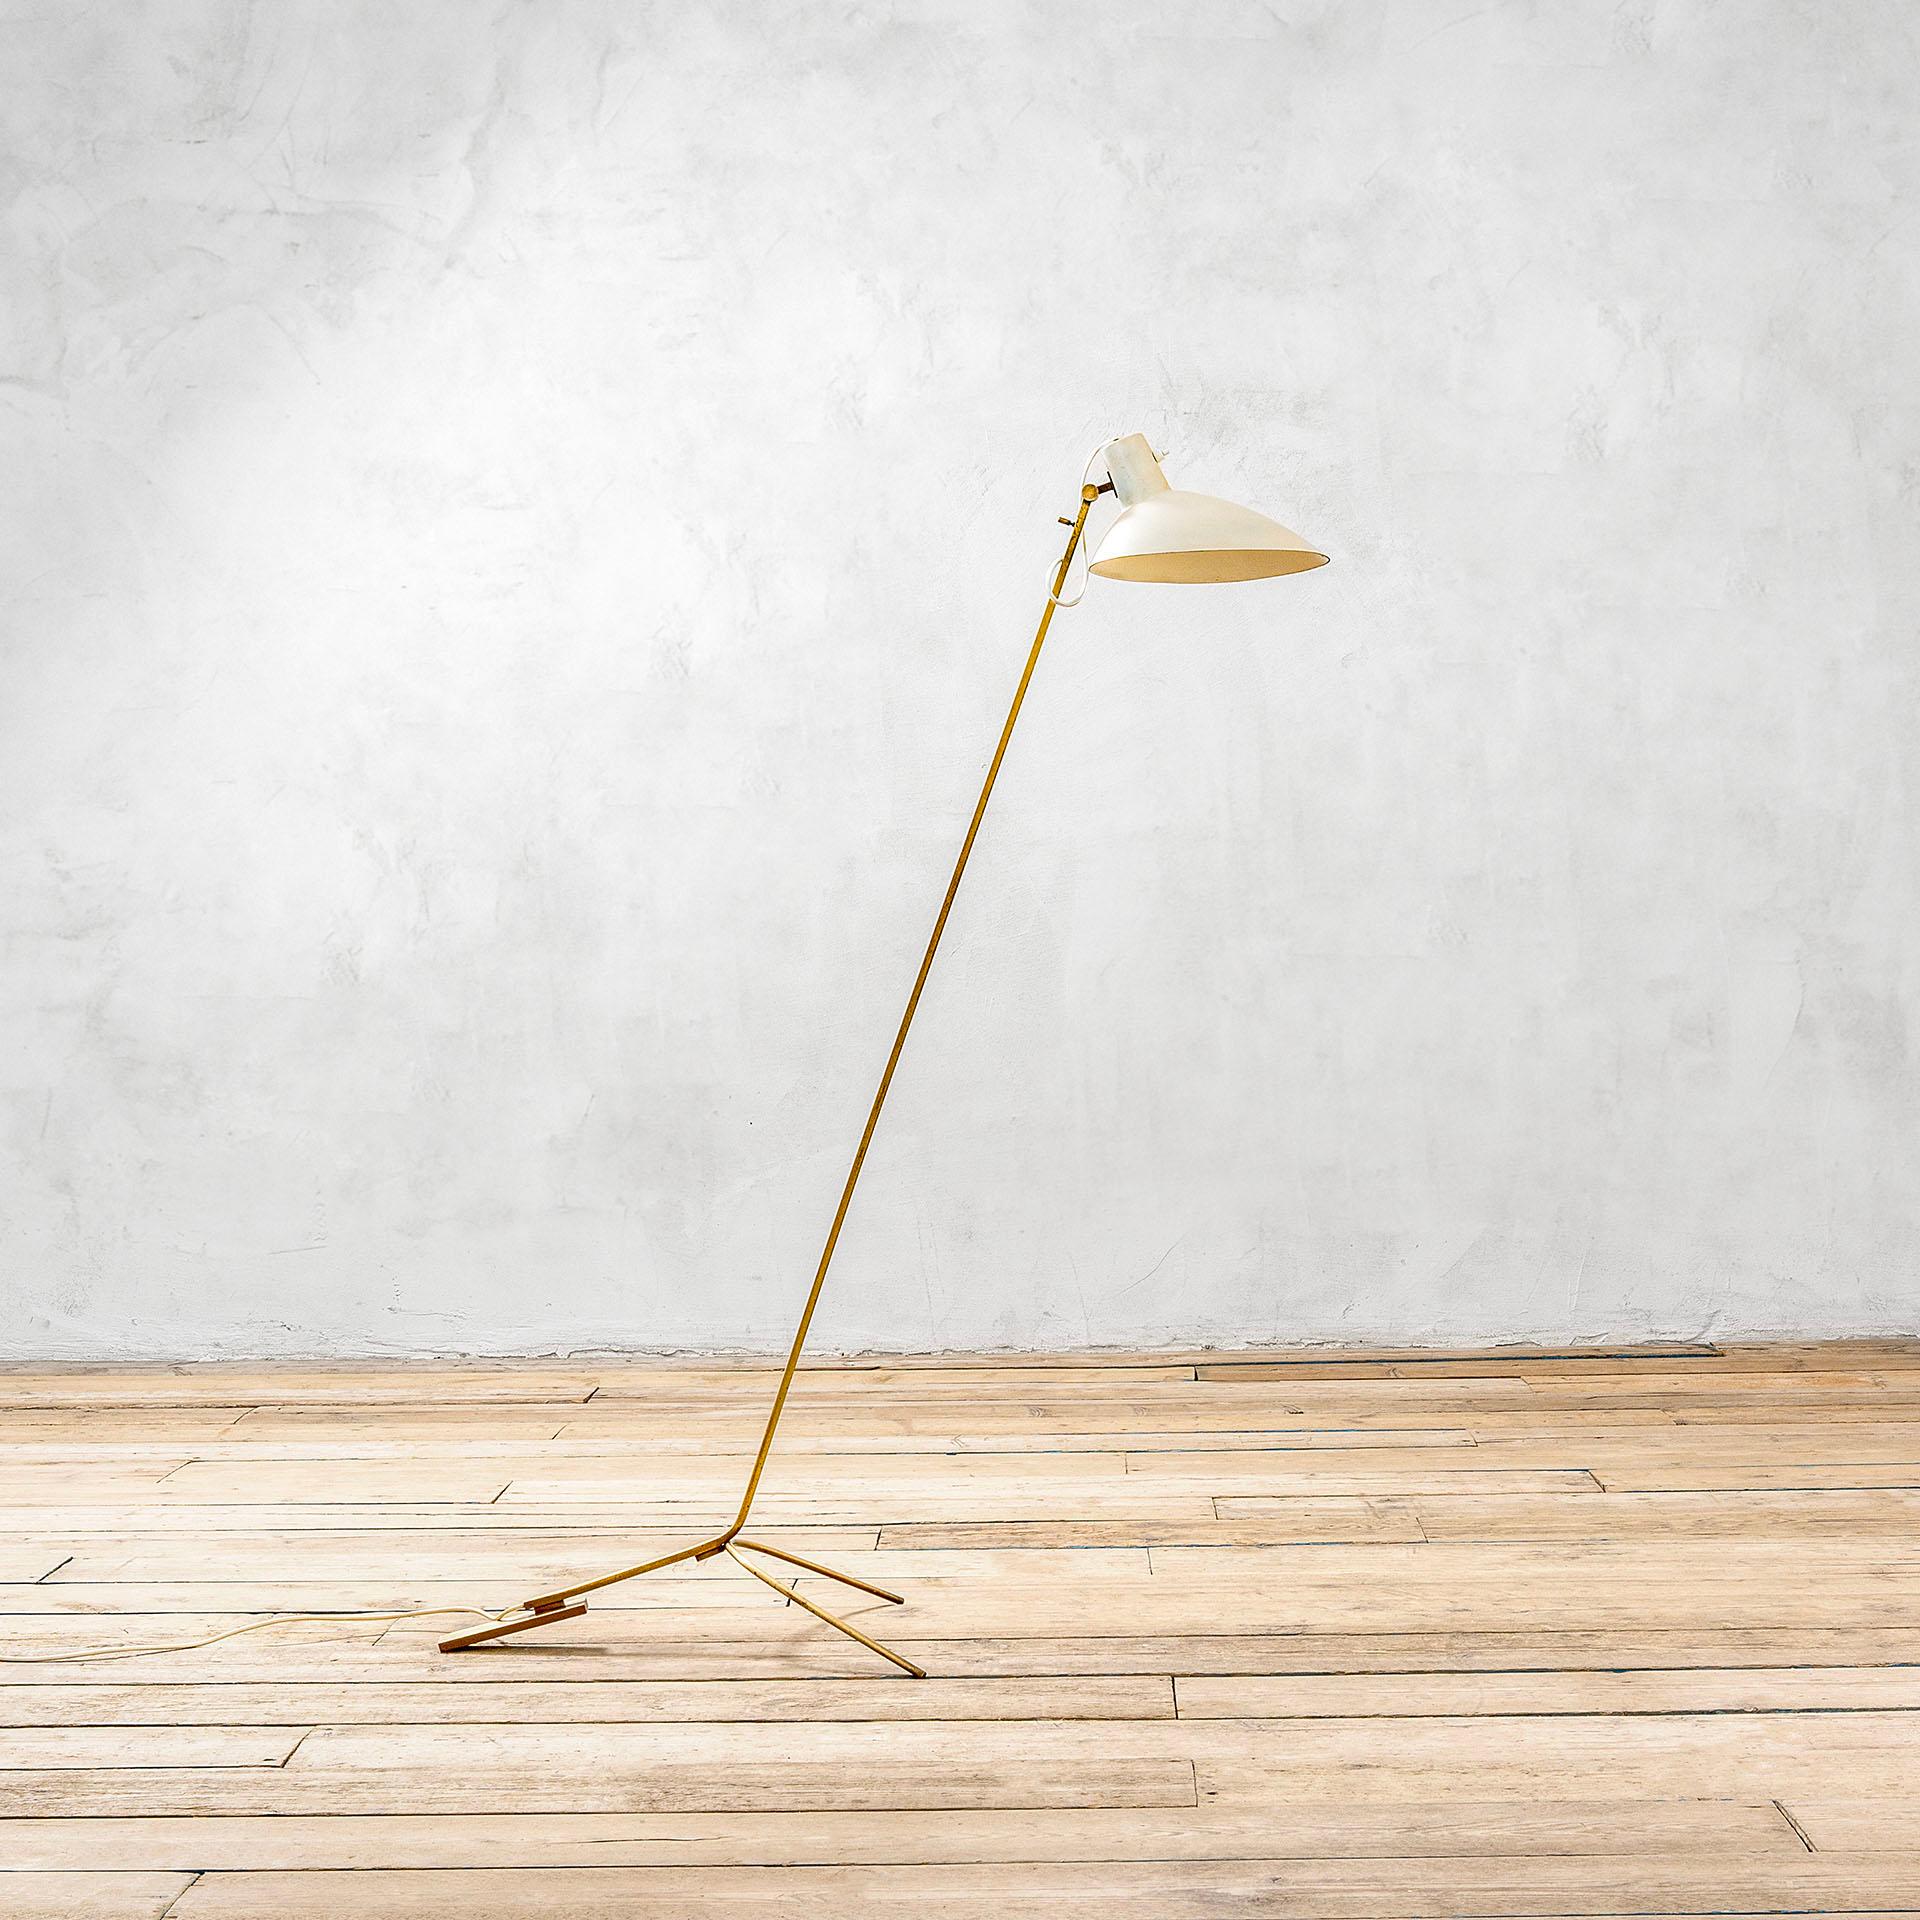 20th Century Vittoriano Viganò Floor Lamps Mod. 1047 for Arteluce, Early 50s In Good Condition For Sale In Turin, Turin